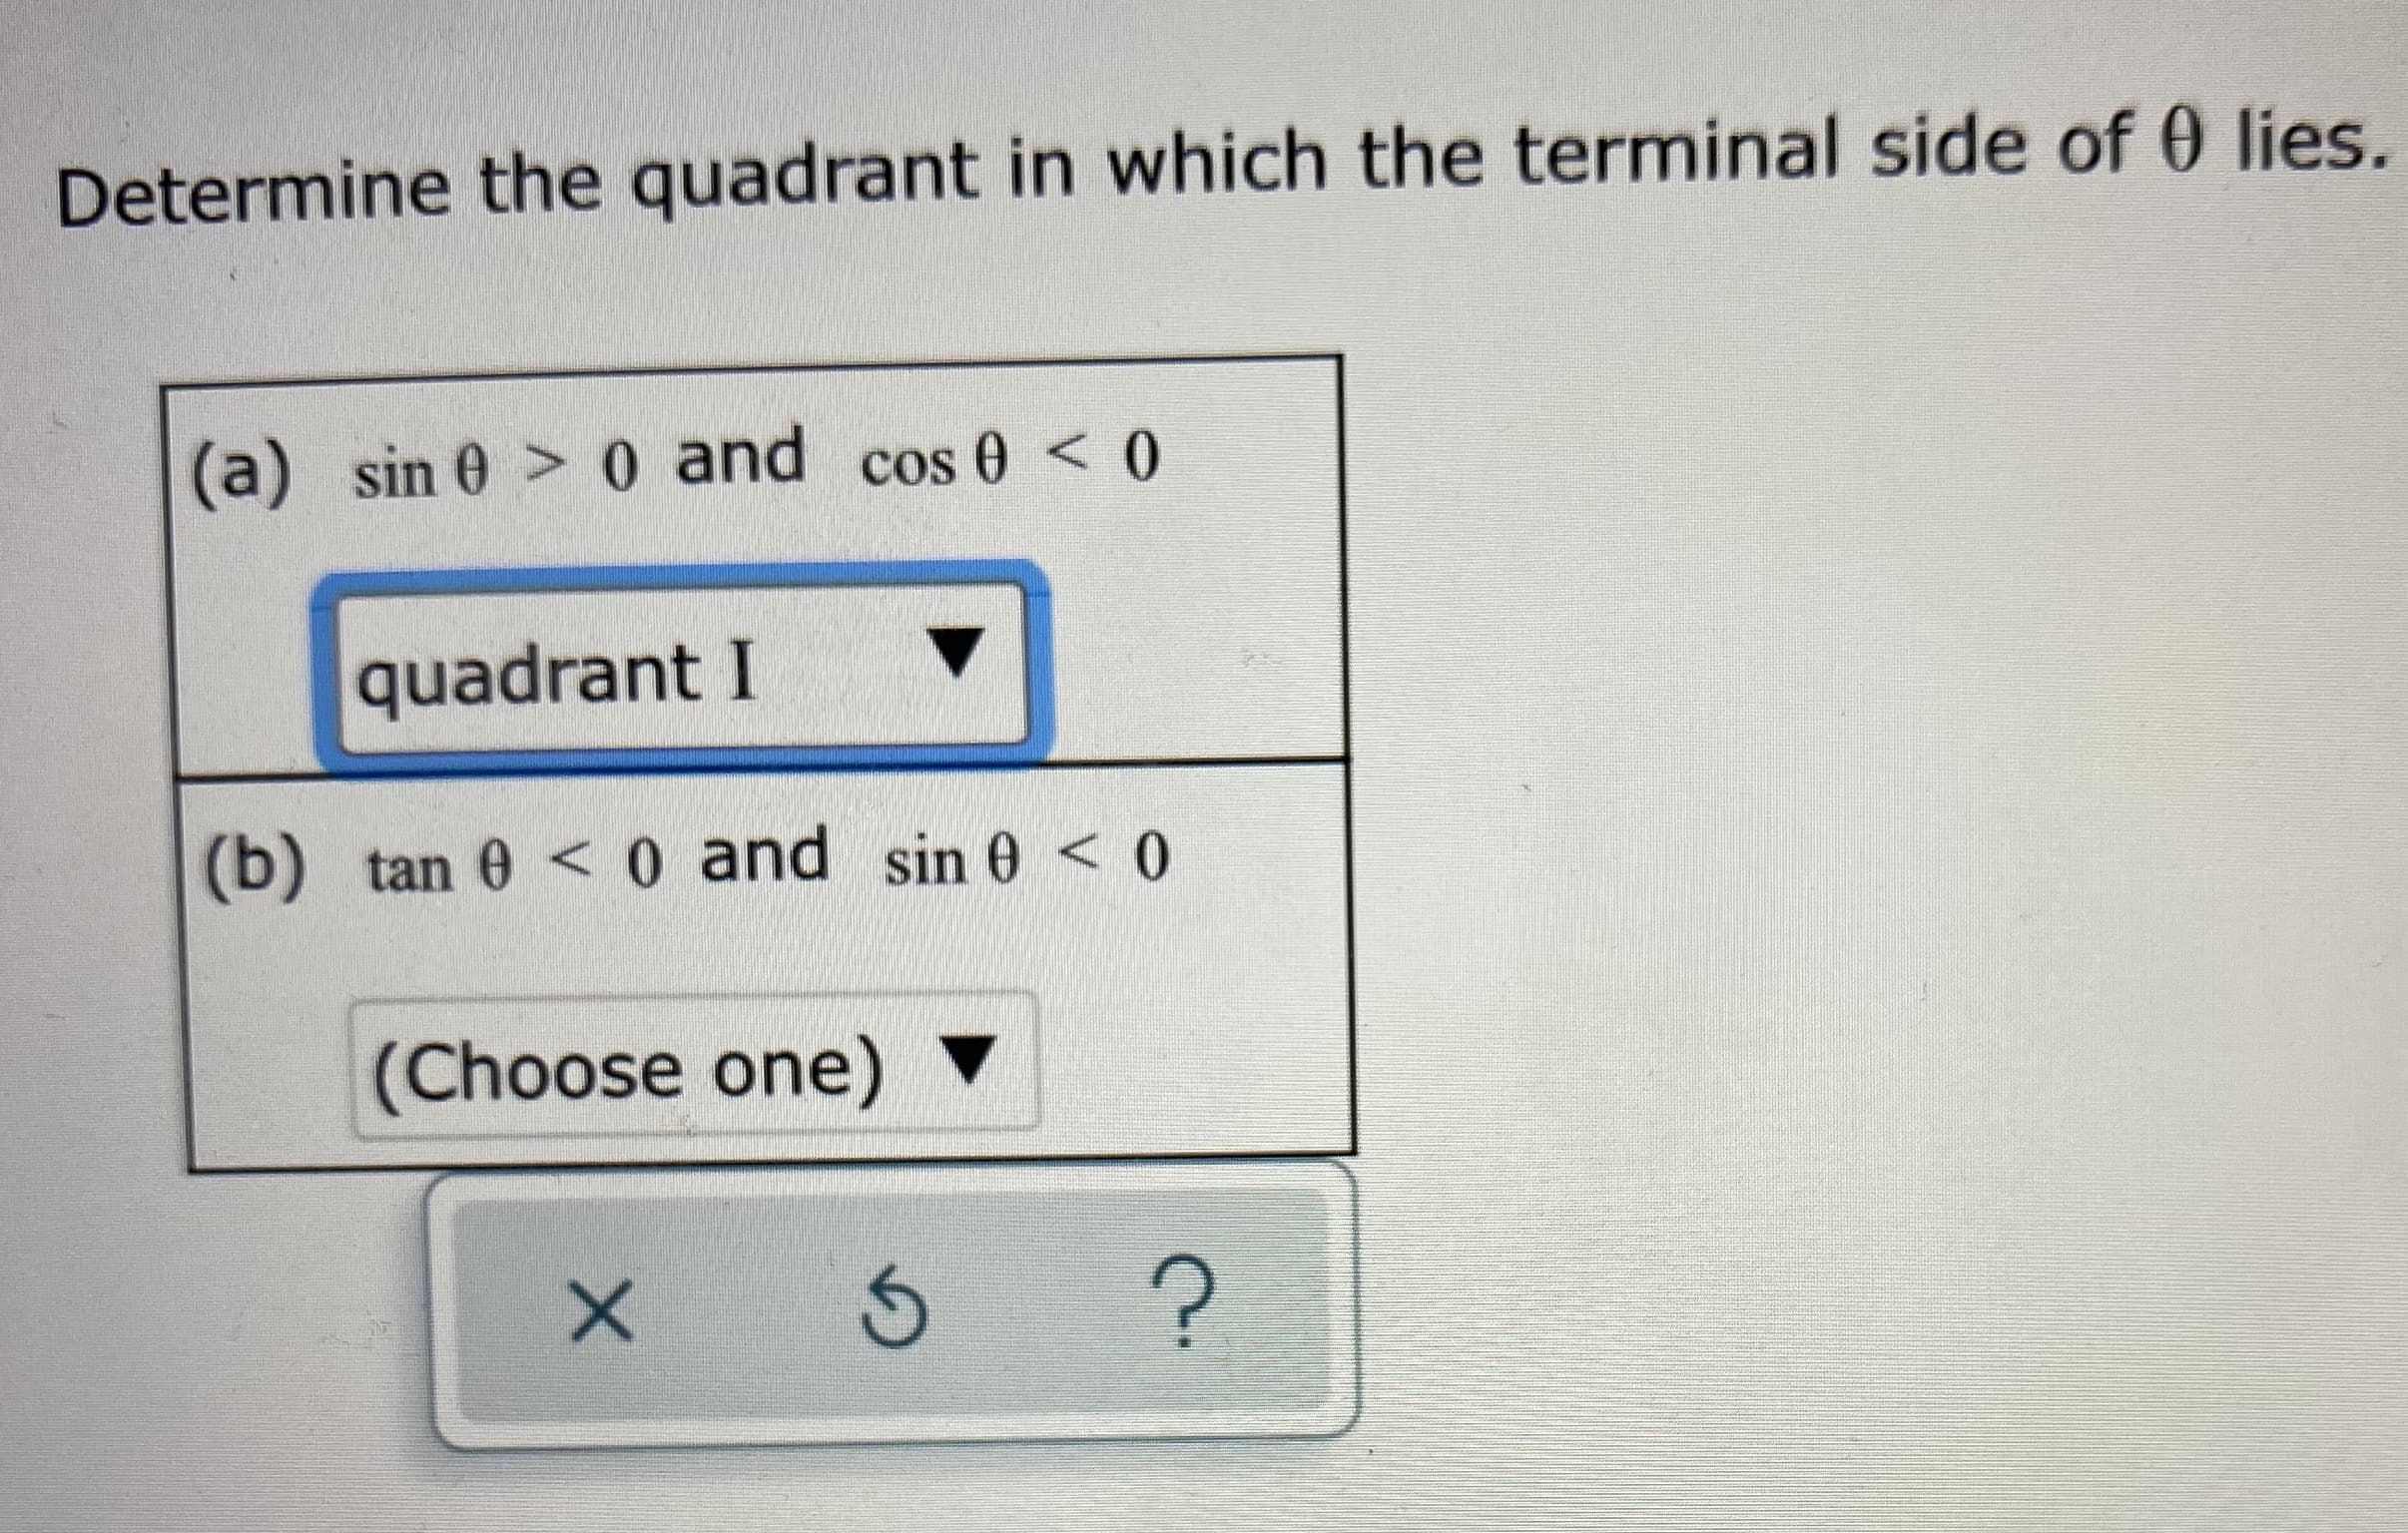 Determine the quadrant in which the terminal side of 0 lies
(a) sin 0 > 0 and cos 0 <0
quadrant I
(b) tan 0 < o and sin 0 < 0
(Choose one)
